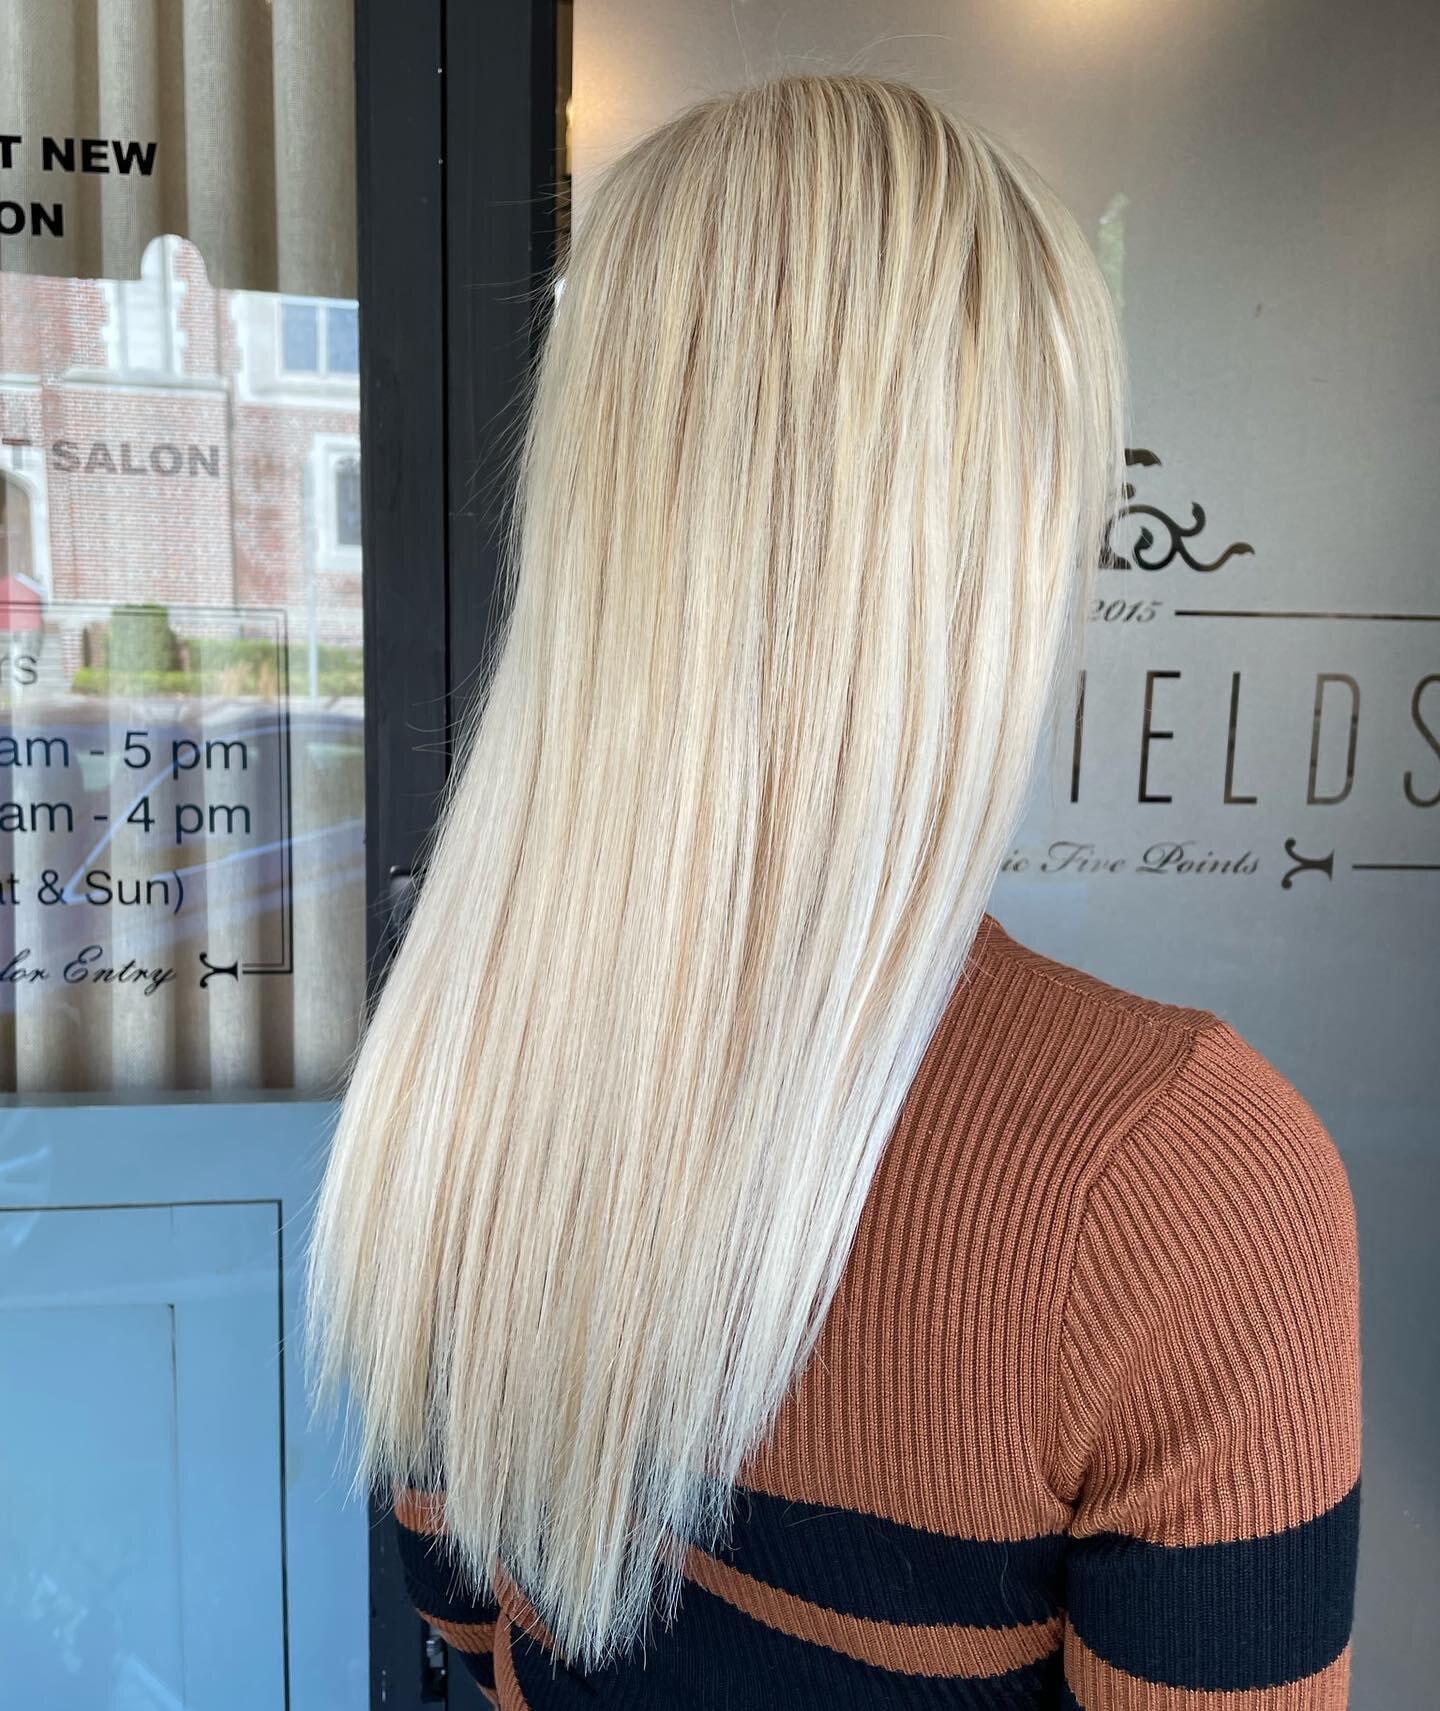 Scott Redfield worked his magic 🪄to achieve a beautiful dimensional blonde on his client over the past year and a half. He maintained her hairs&rsquo; integrity by using gentle lightener for her highlights as well as carefully placed #itipextensions